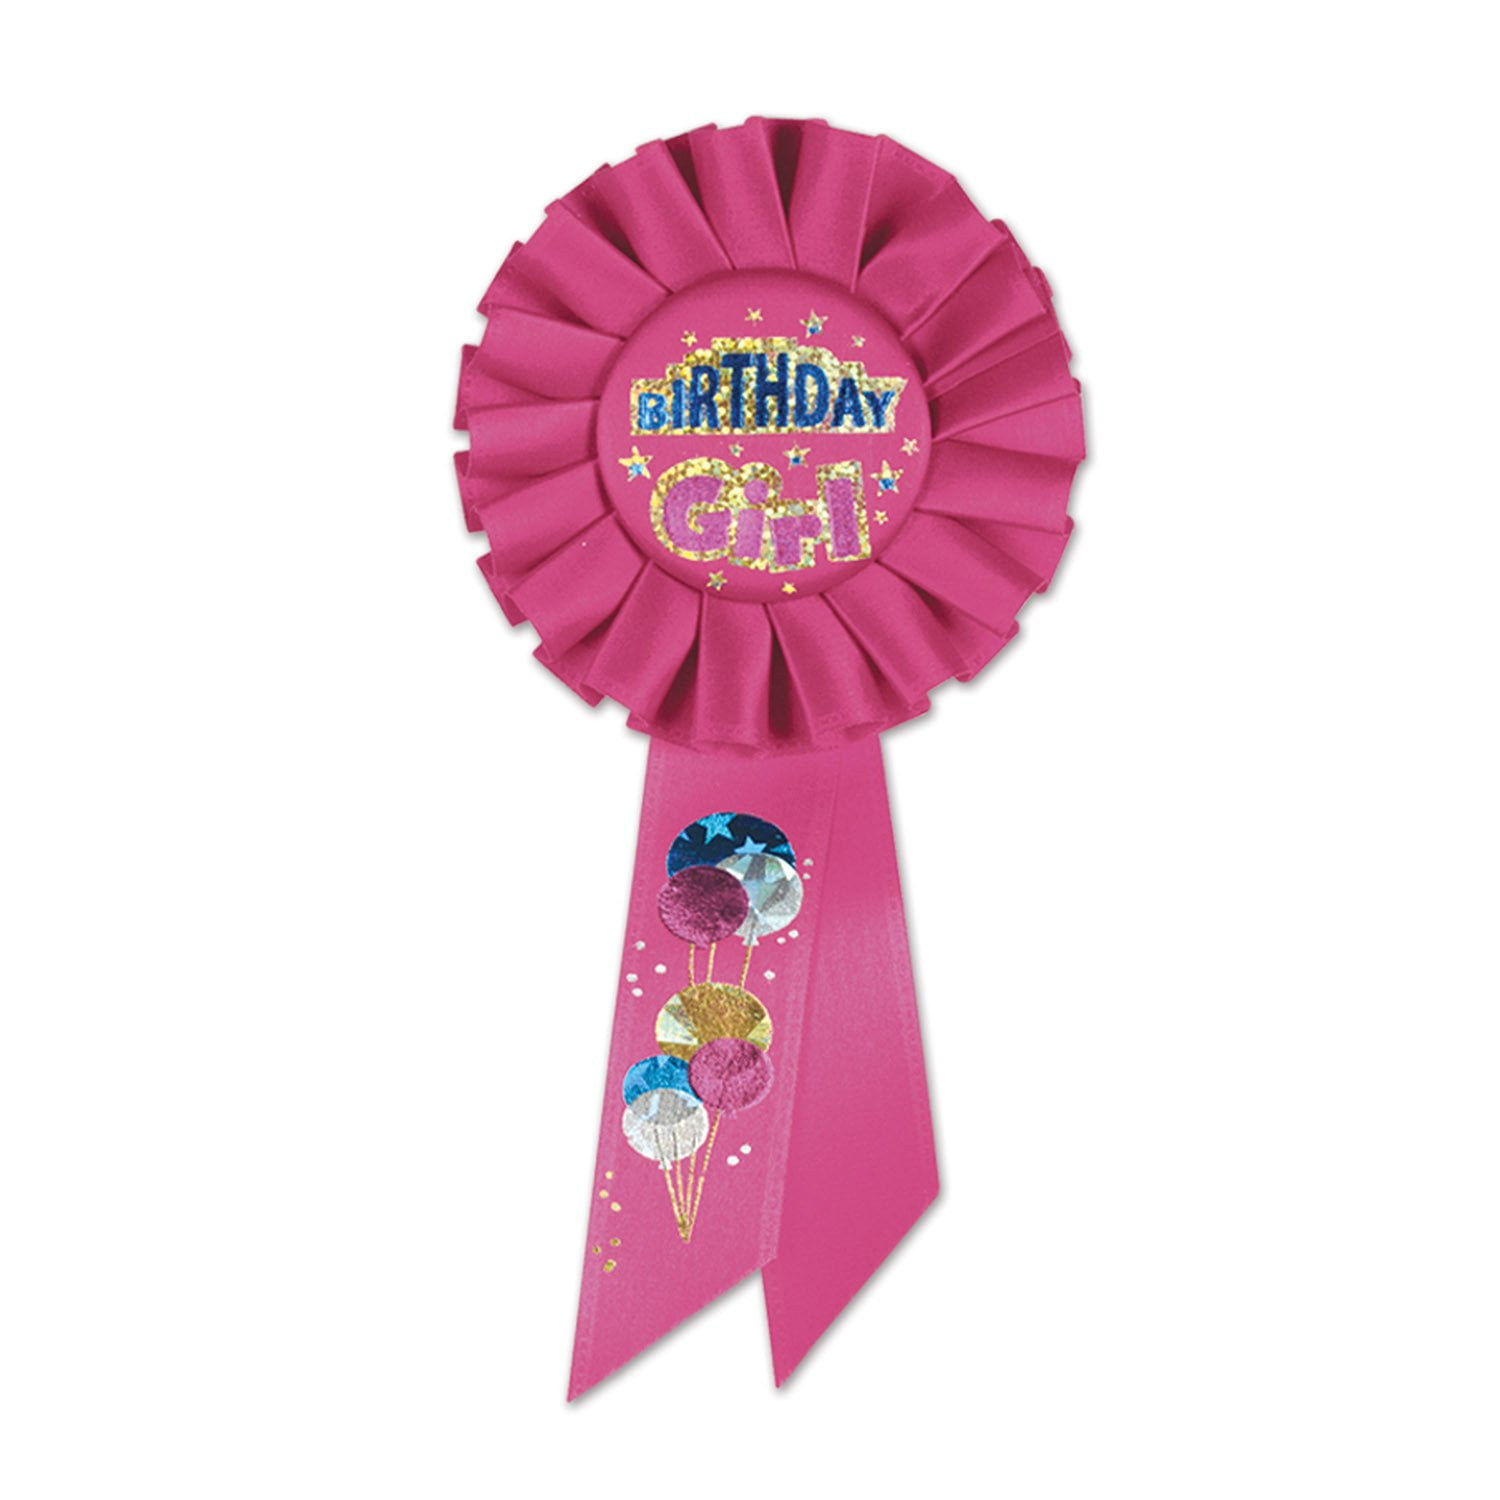 Beistle Pack of 6 Hot Pink “Sweet 16” Teen Birthday Party Celebration Rosette Ribbons 6.5 